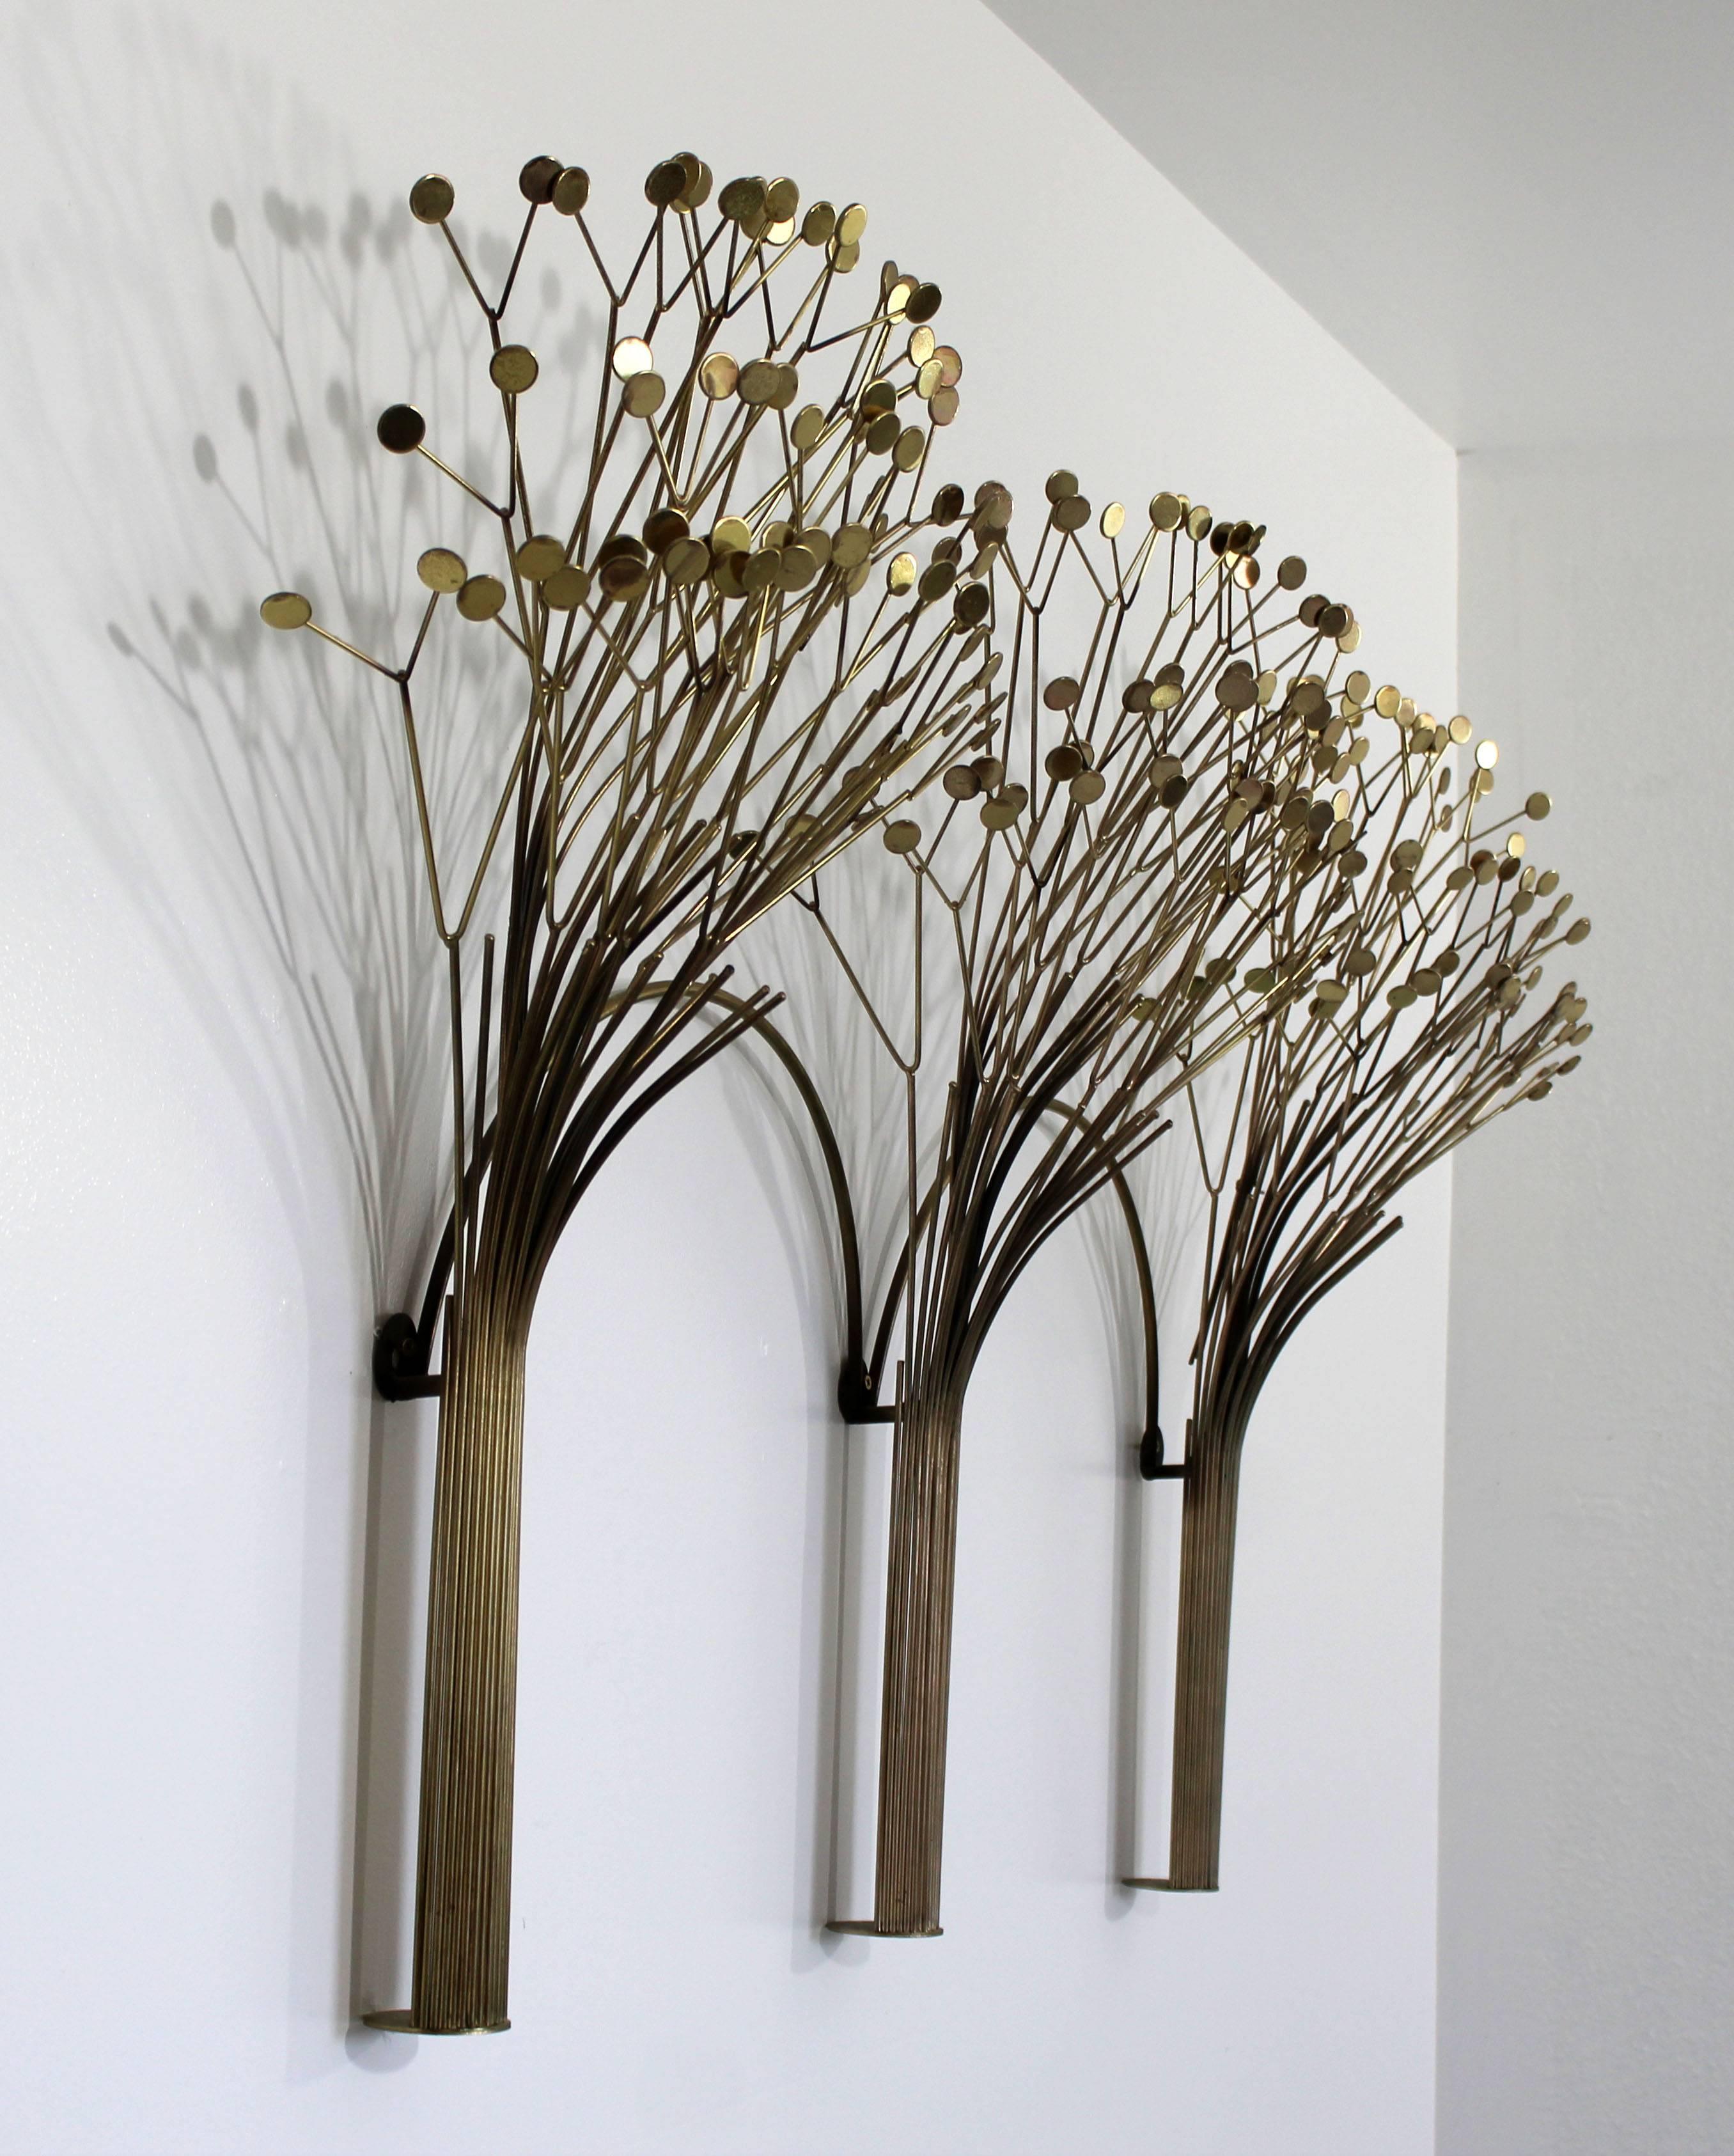 American Mid-Century Modern Rare Jere Brass Three Tree Wall Sculpture Signed Dated 1970s